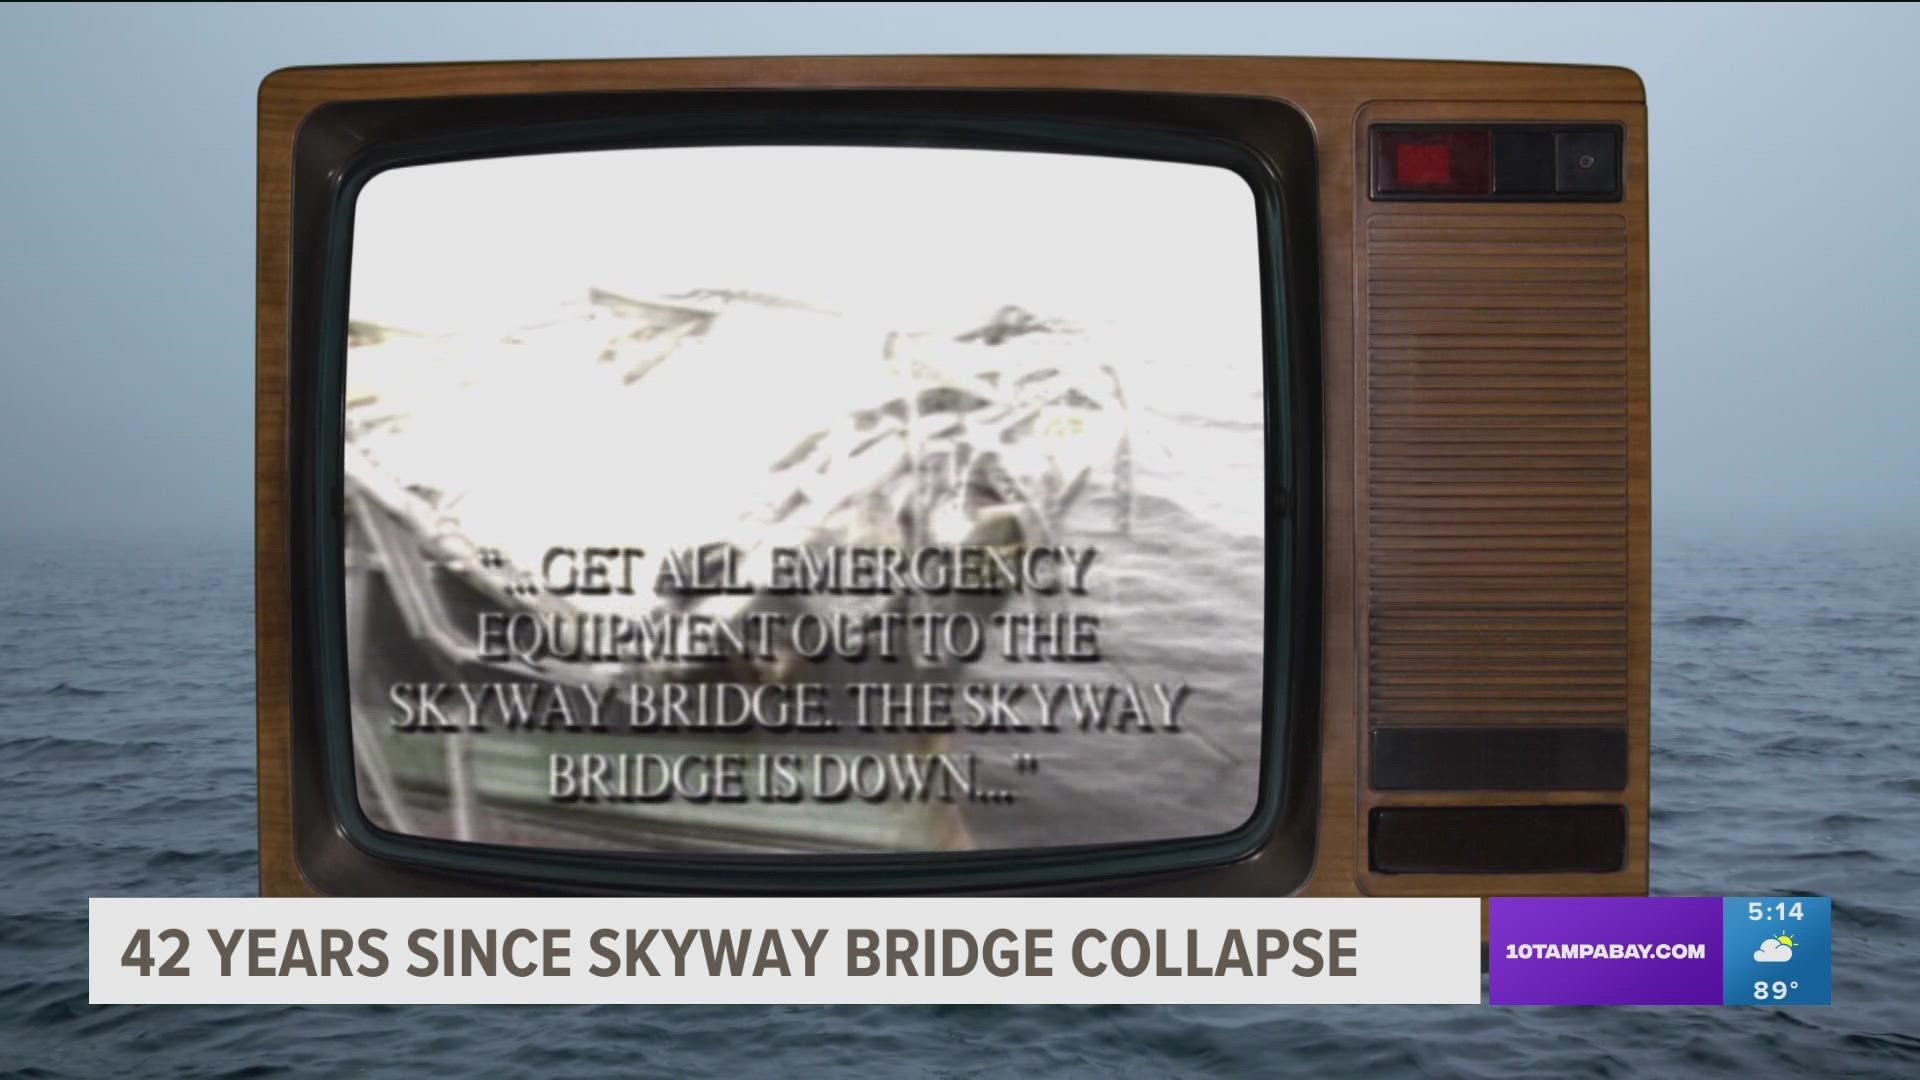 A freighter crashed into the bridge during a storm on May 9, 1980.